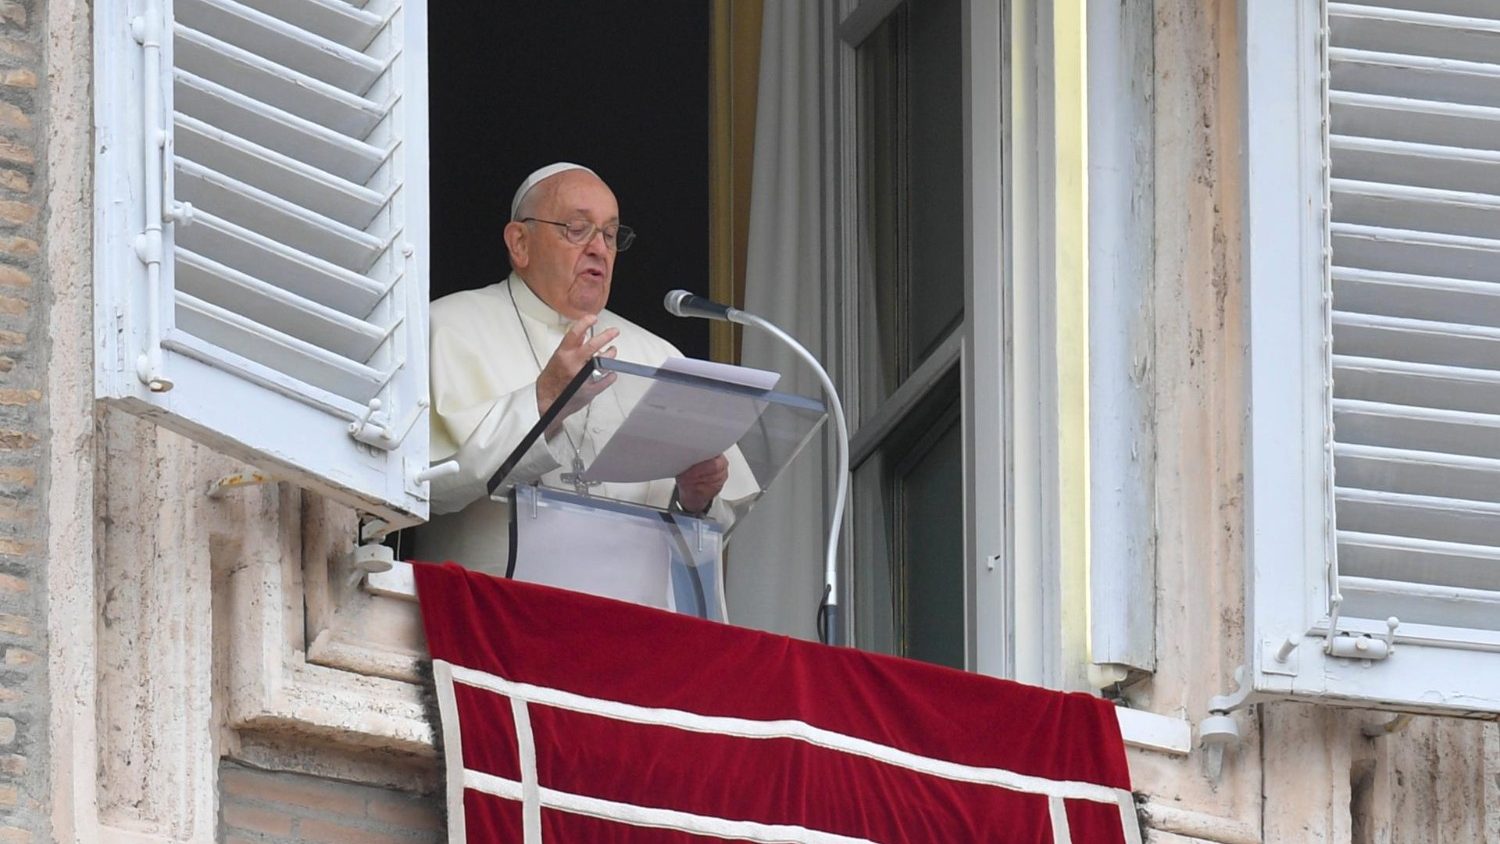 Angelus: Today the Pope recalls that “trust liberates and fear paralyzes”